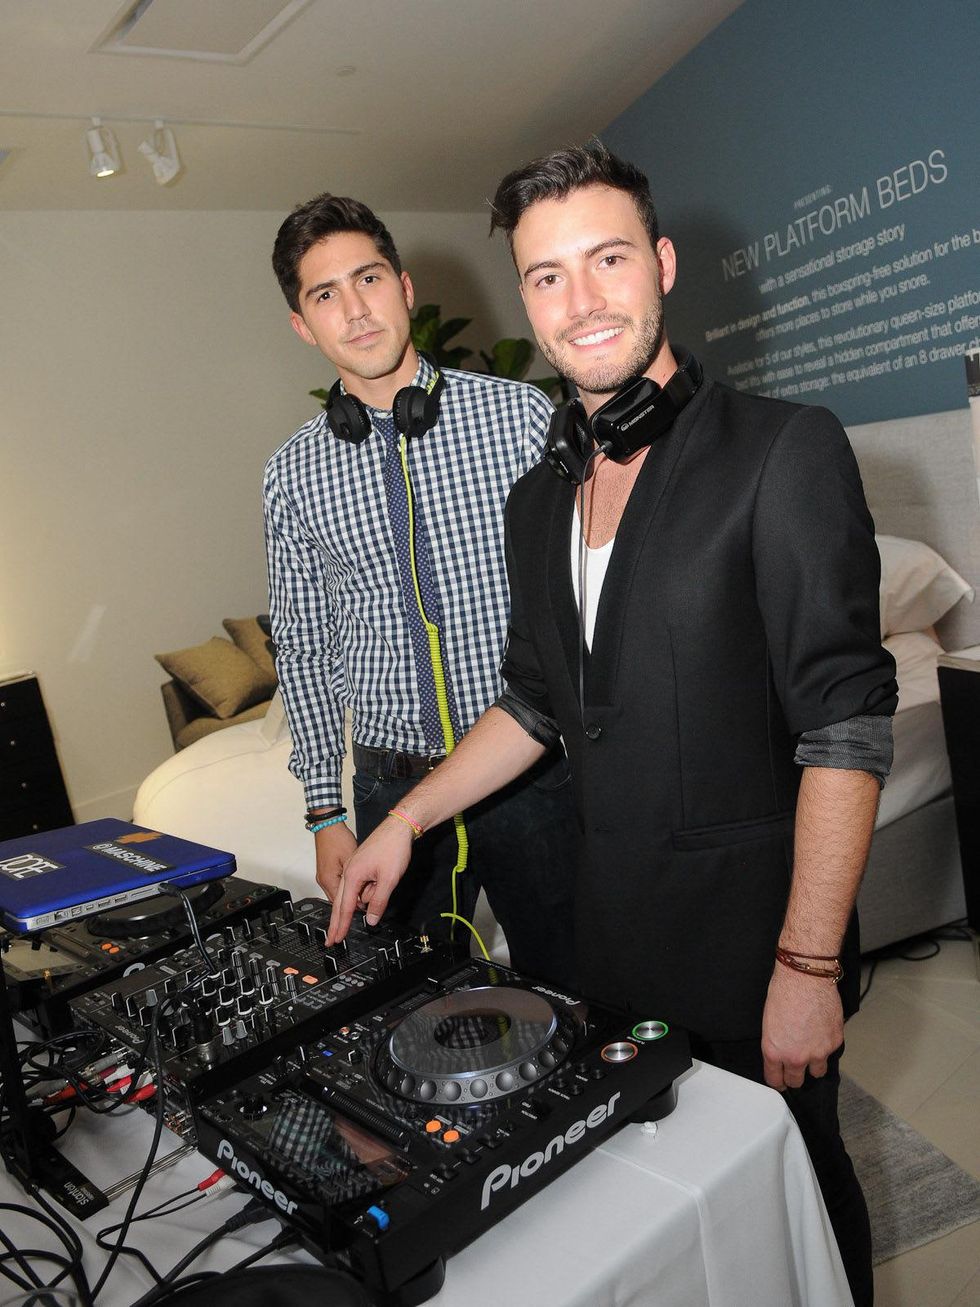 Mexico City\u2019s Hottest DJs Tom & Collins at the Mitchell Gold + Bob Williams Houston grand opening celebration